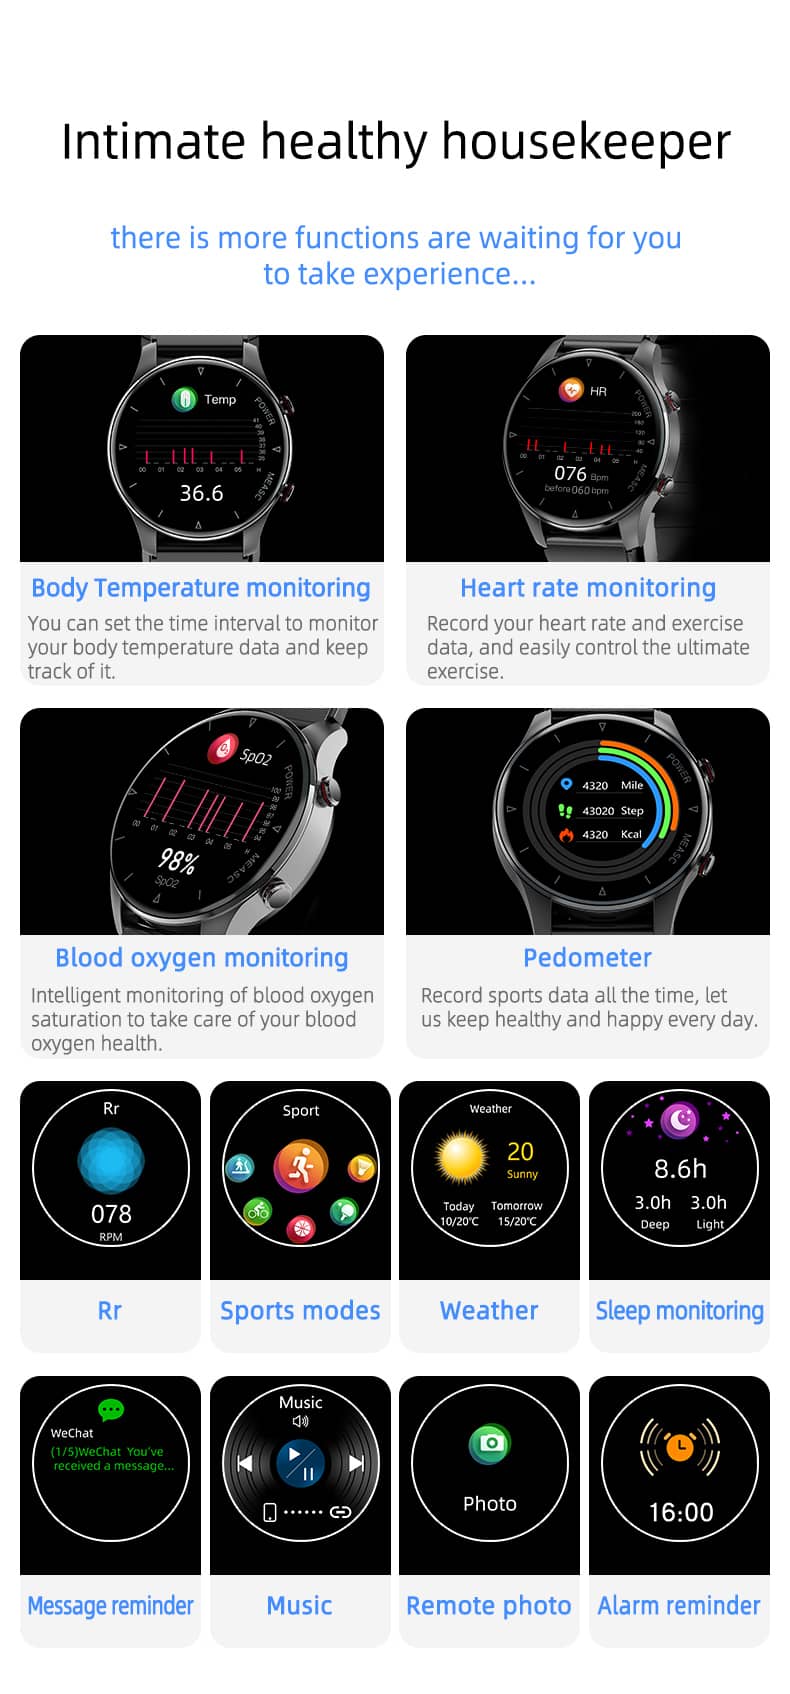 Findtime Accurate Blood Pressure Monitor Smart Watch with Air Pump Body Temperature Heart Rate SpO2